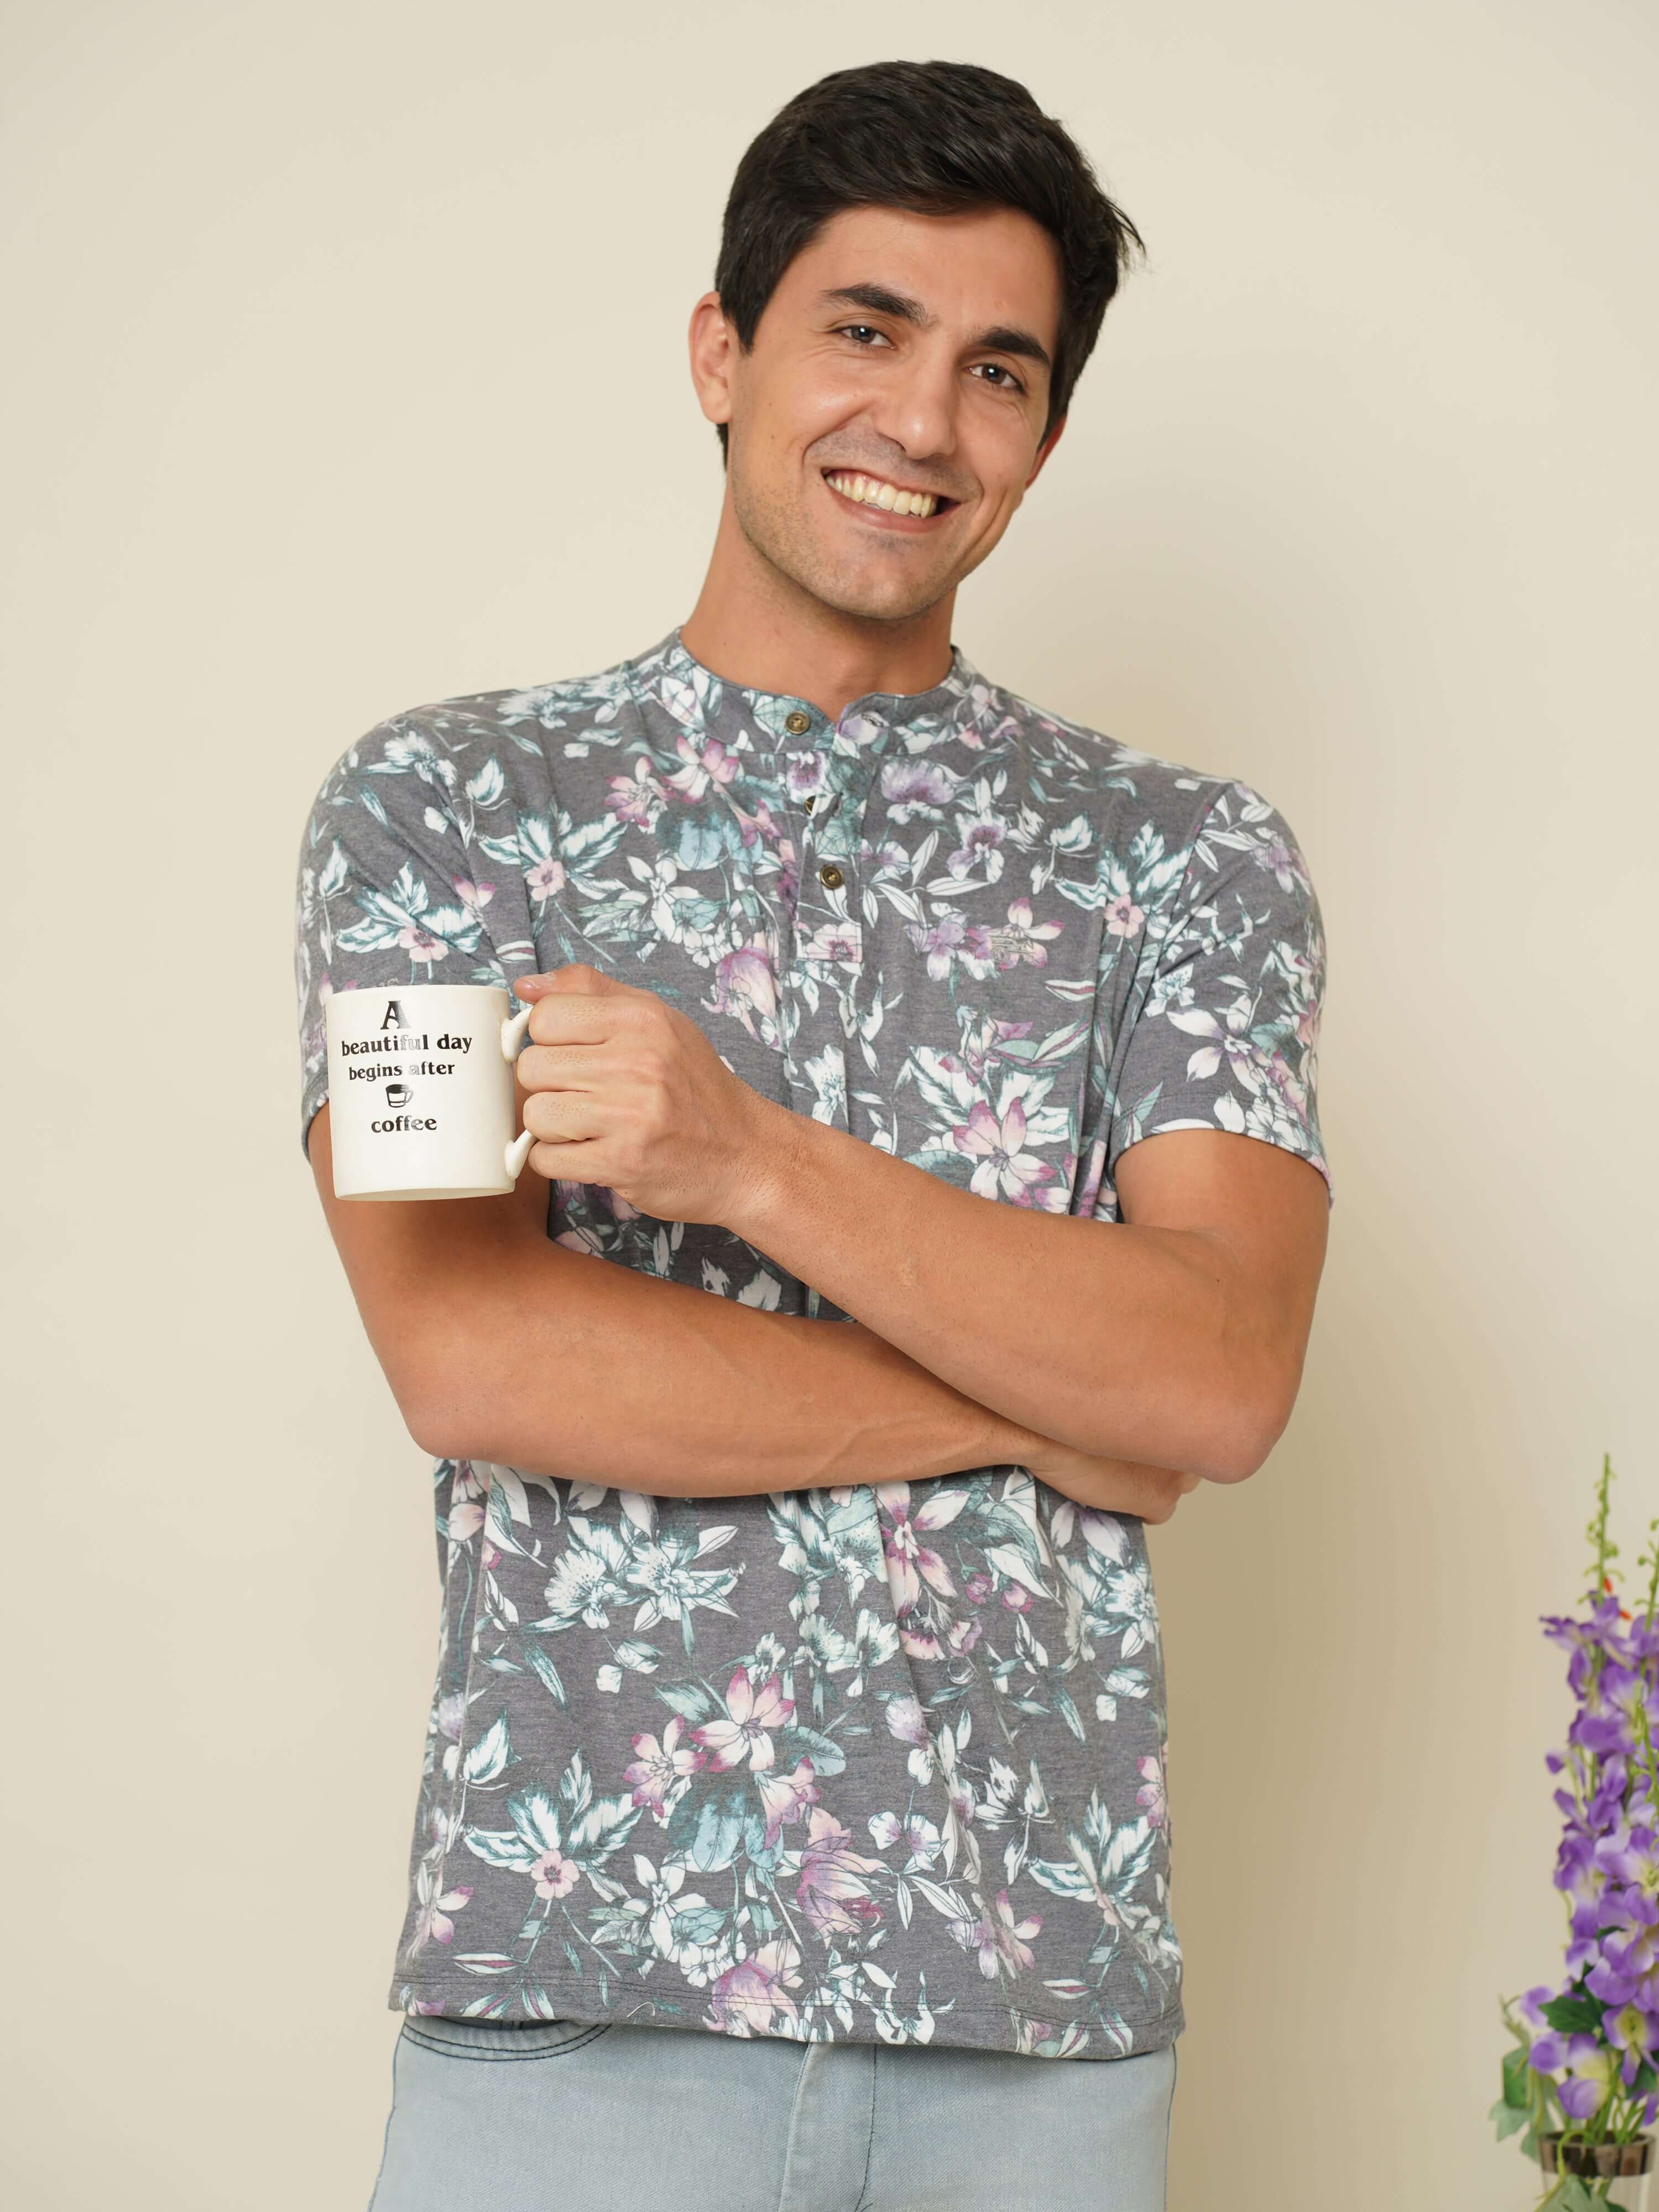 Floral Garden Henley Neck T Shirt shop online at Estilocus. 100% Cotton Designed and printed on knitted fabric. The fabric is stretchy and lightweight, with a soft skin feel and no wrinkles. The Henley collar is smooth on the neck and keeps you comfortabl